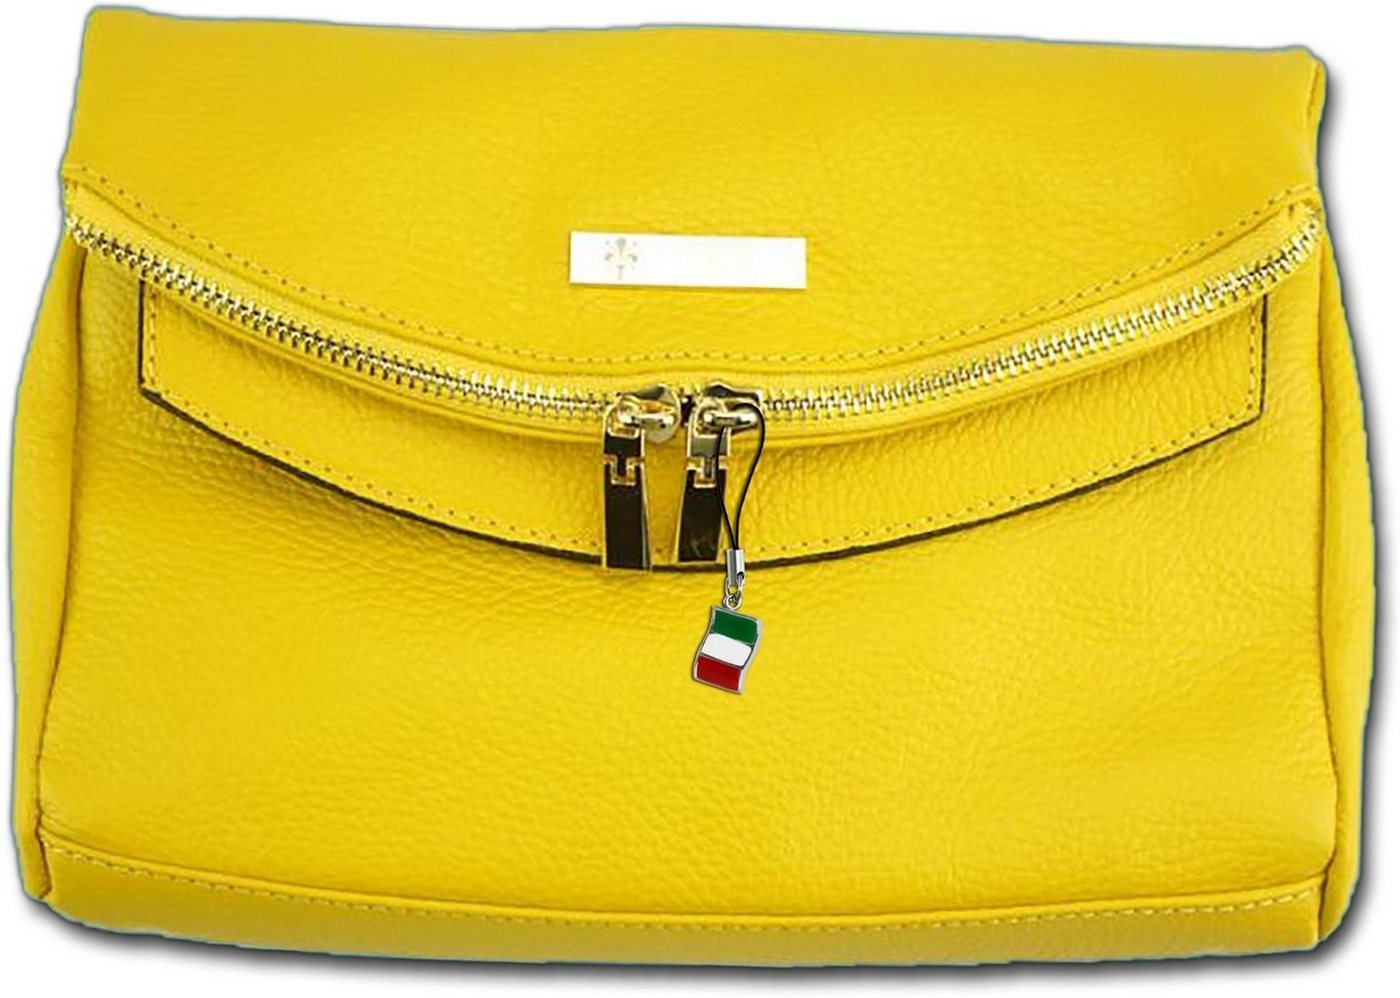 FLORENCE Clutch Florence 2in1 Echtleder Damentasche gelb (Clutch, Clutch), Damen Tasche Echtleder gelb, Made-In Italy von FLORENCE